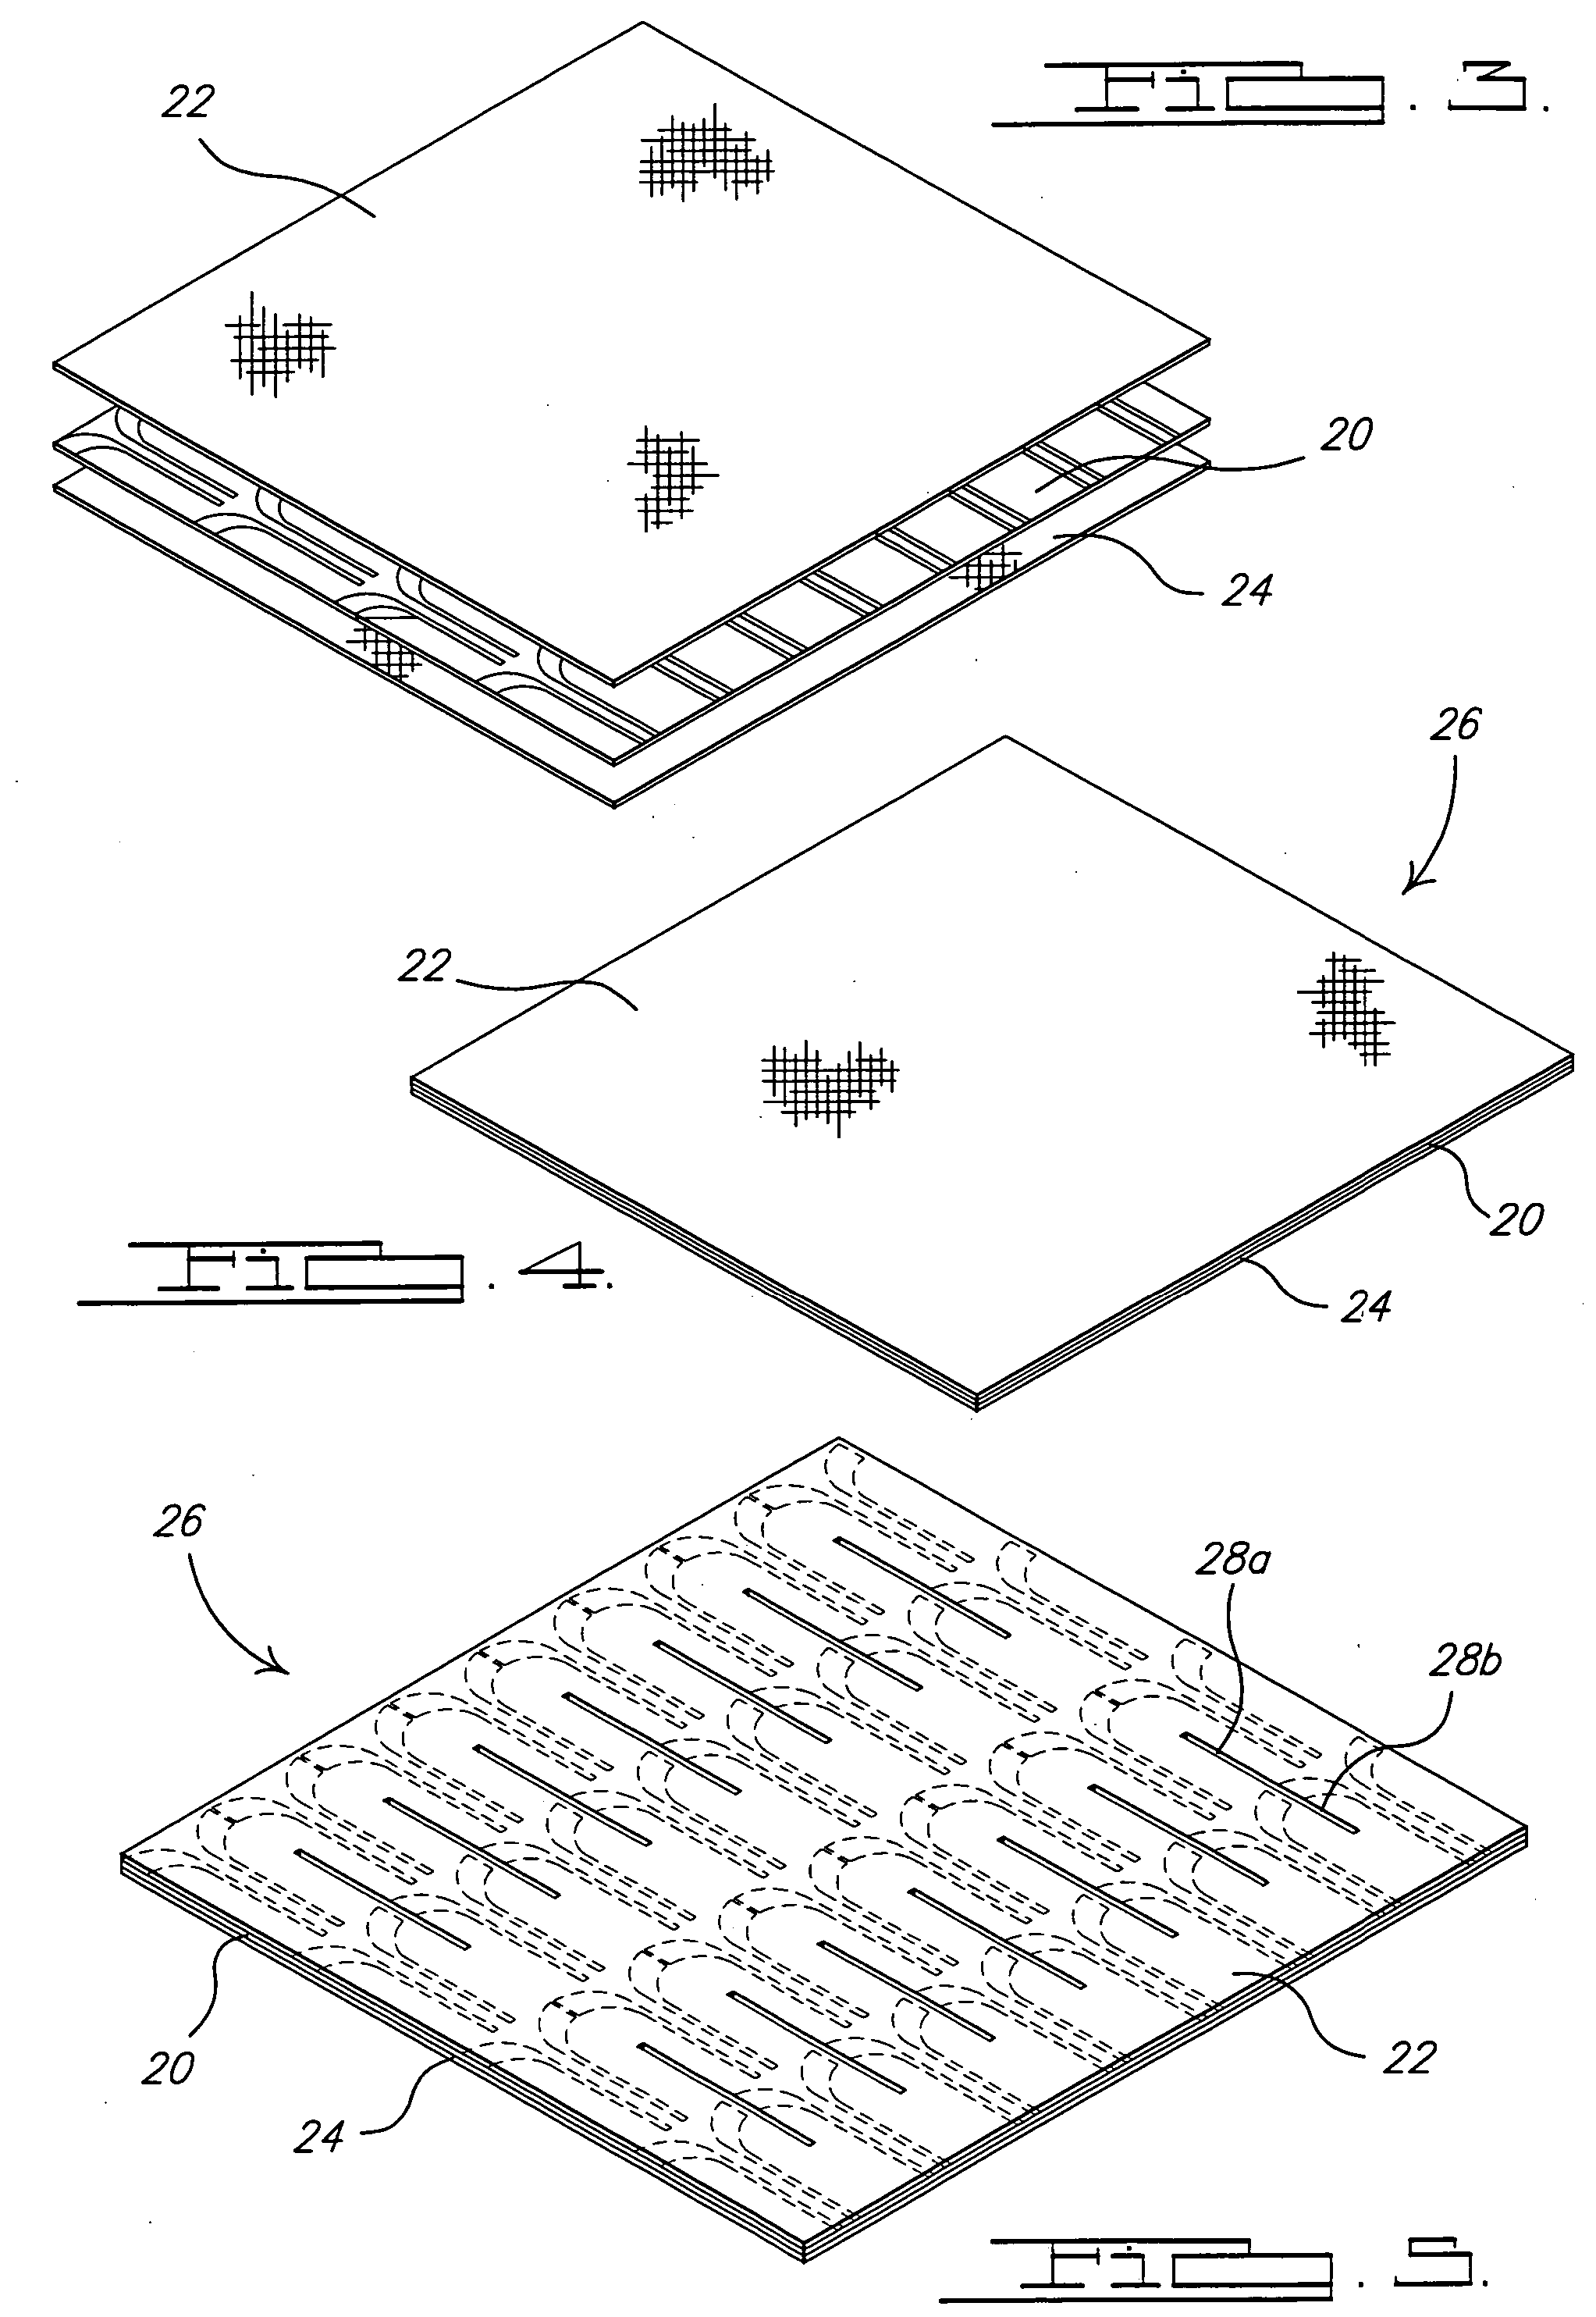 Design and fabrication methodology for a phased array antenna with shielded/integrated structure